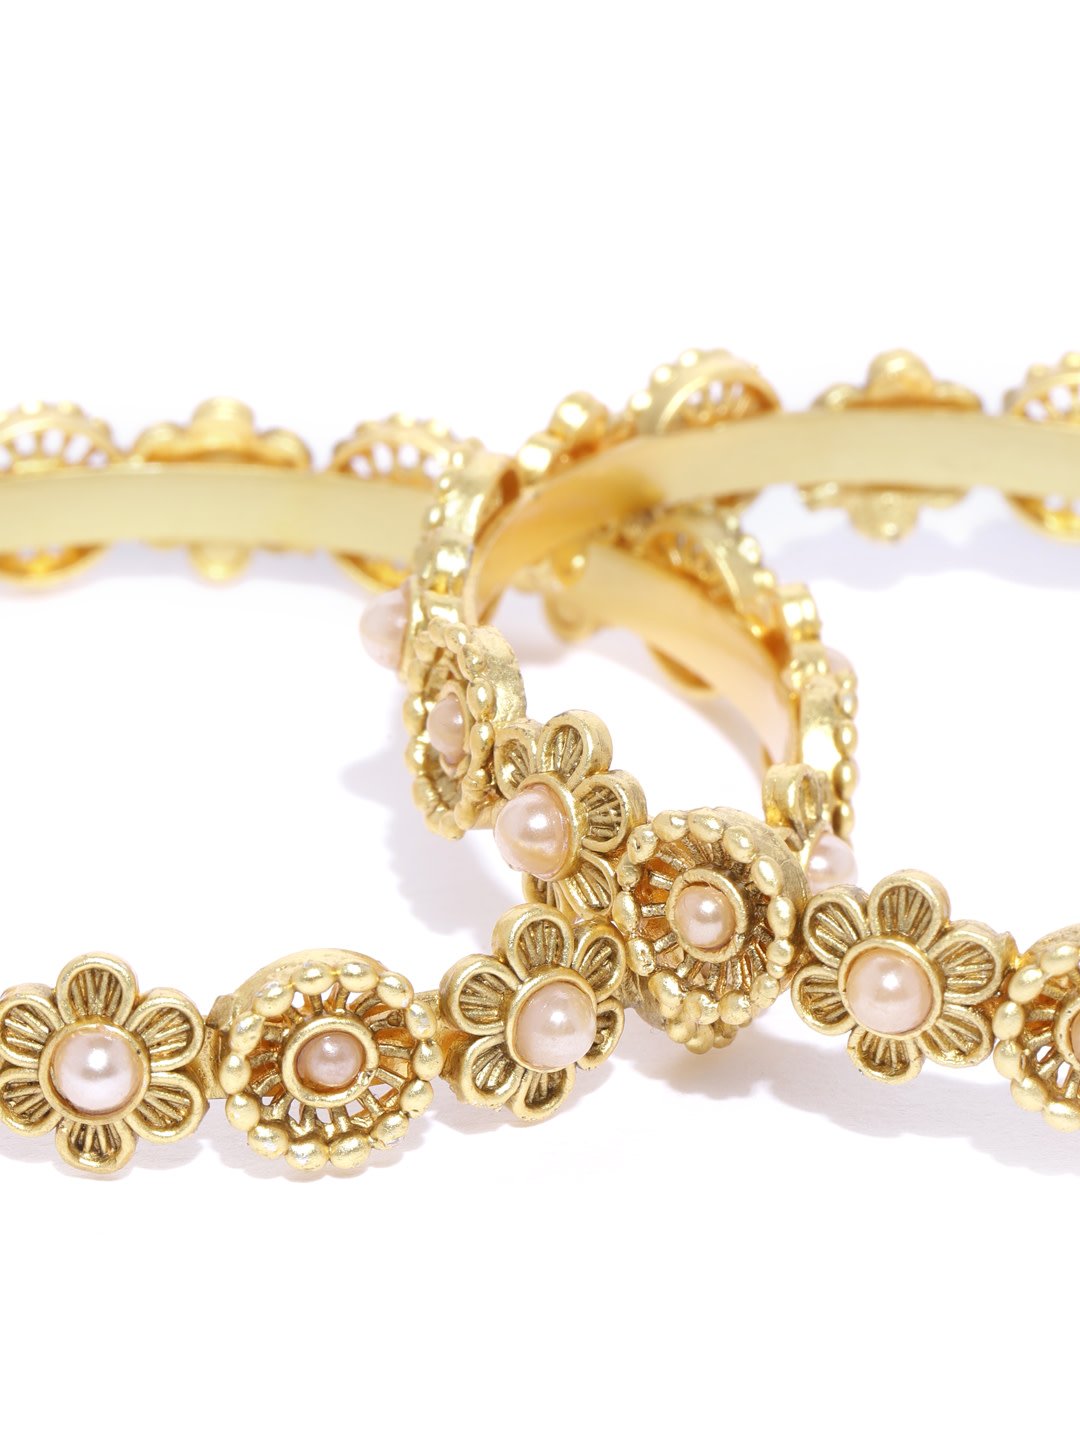 Women's Set Of 2 Gold-Plated Pearls Studded Bangles in Floral Pattern - Priyaasi